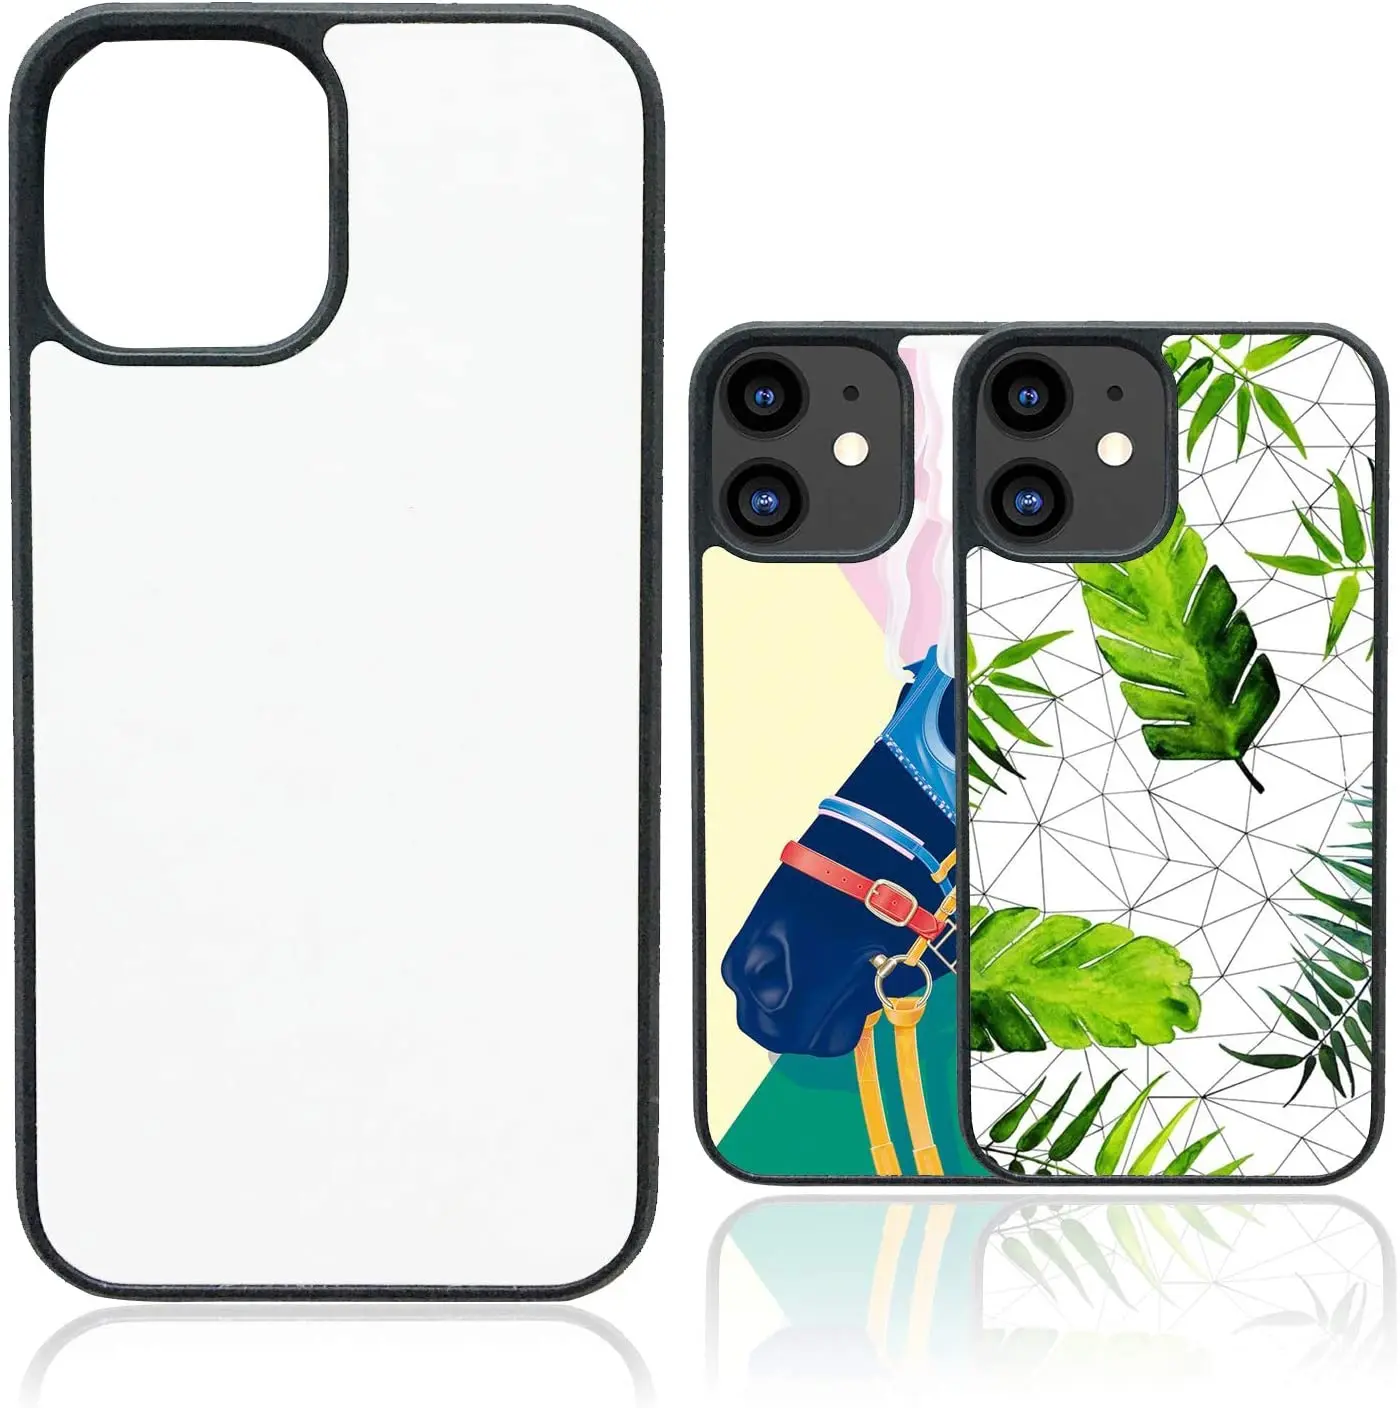 

XINGE Tpu Pc 2D Blank Sublimation Printing Cell Mobile Phone Case Back Cover For Iphone 13 12 11Pro Max Mini X Xs Max Xr, White,clear,black